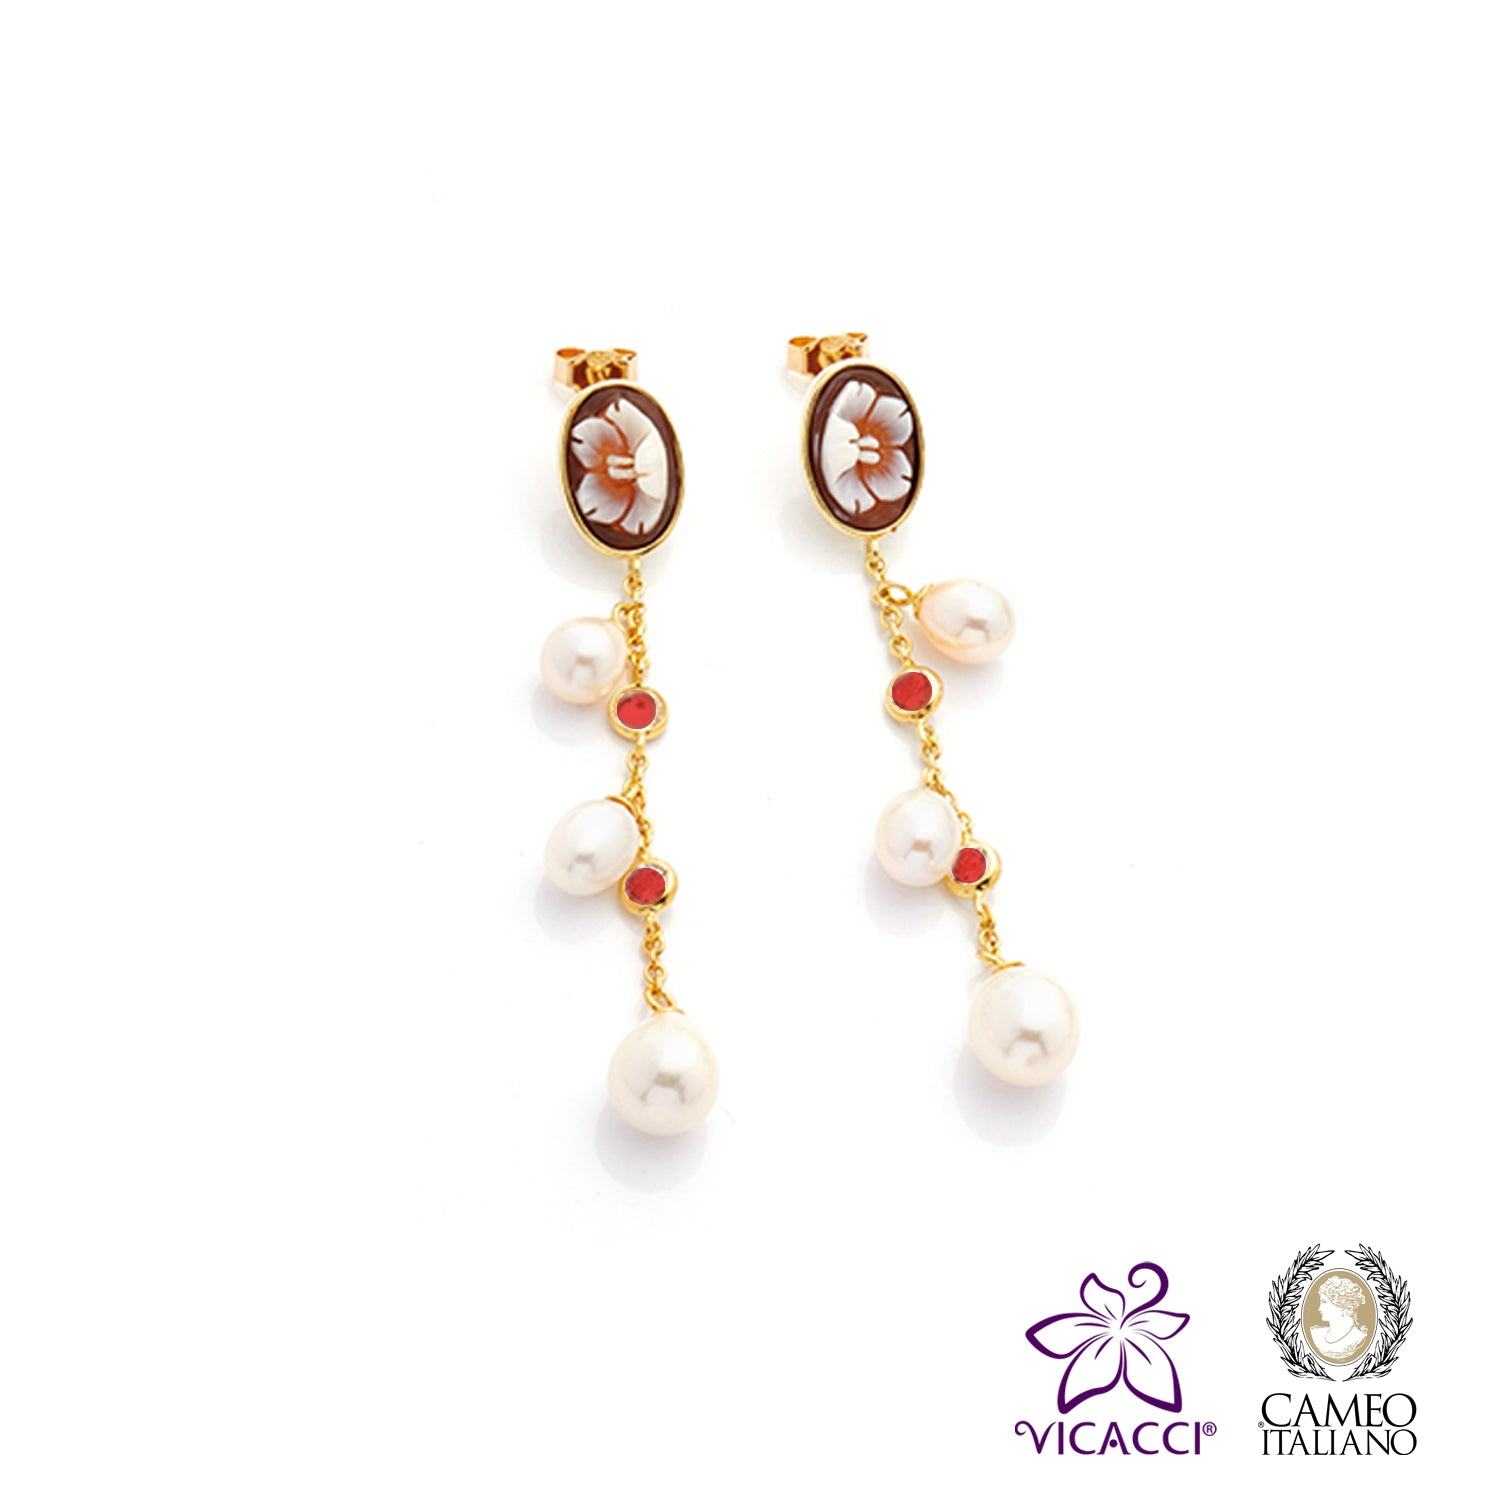 Cameo Italiano, OC4 Earrings, Gold Plated Sterling Silver